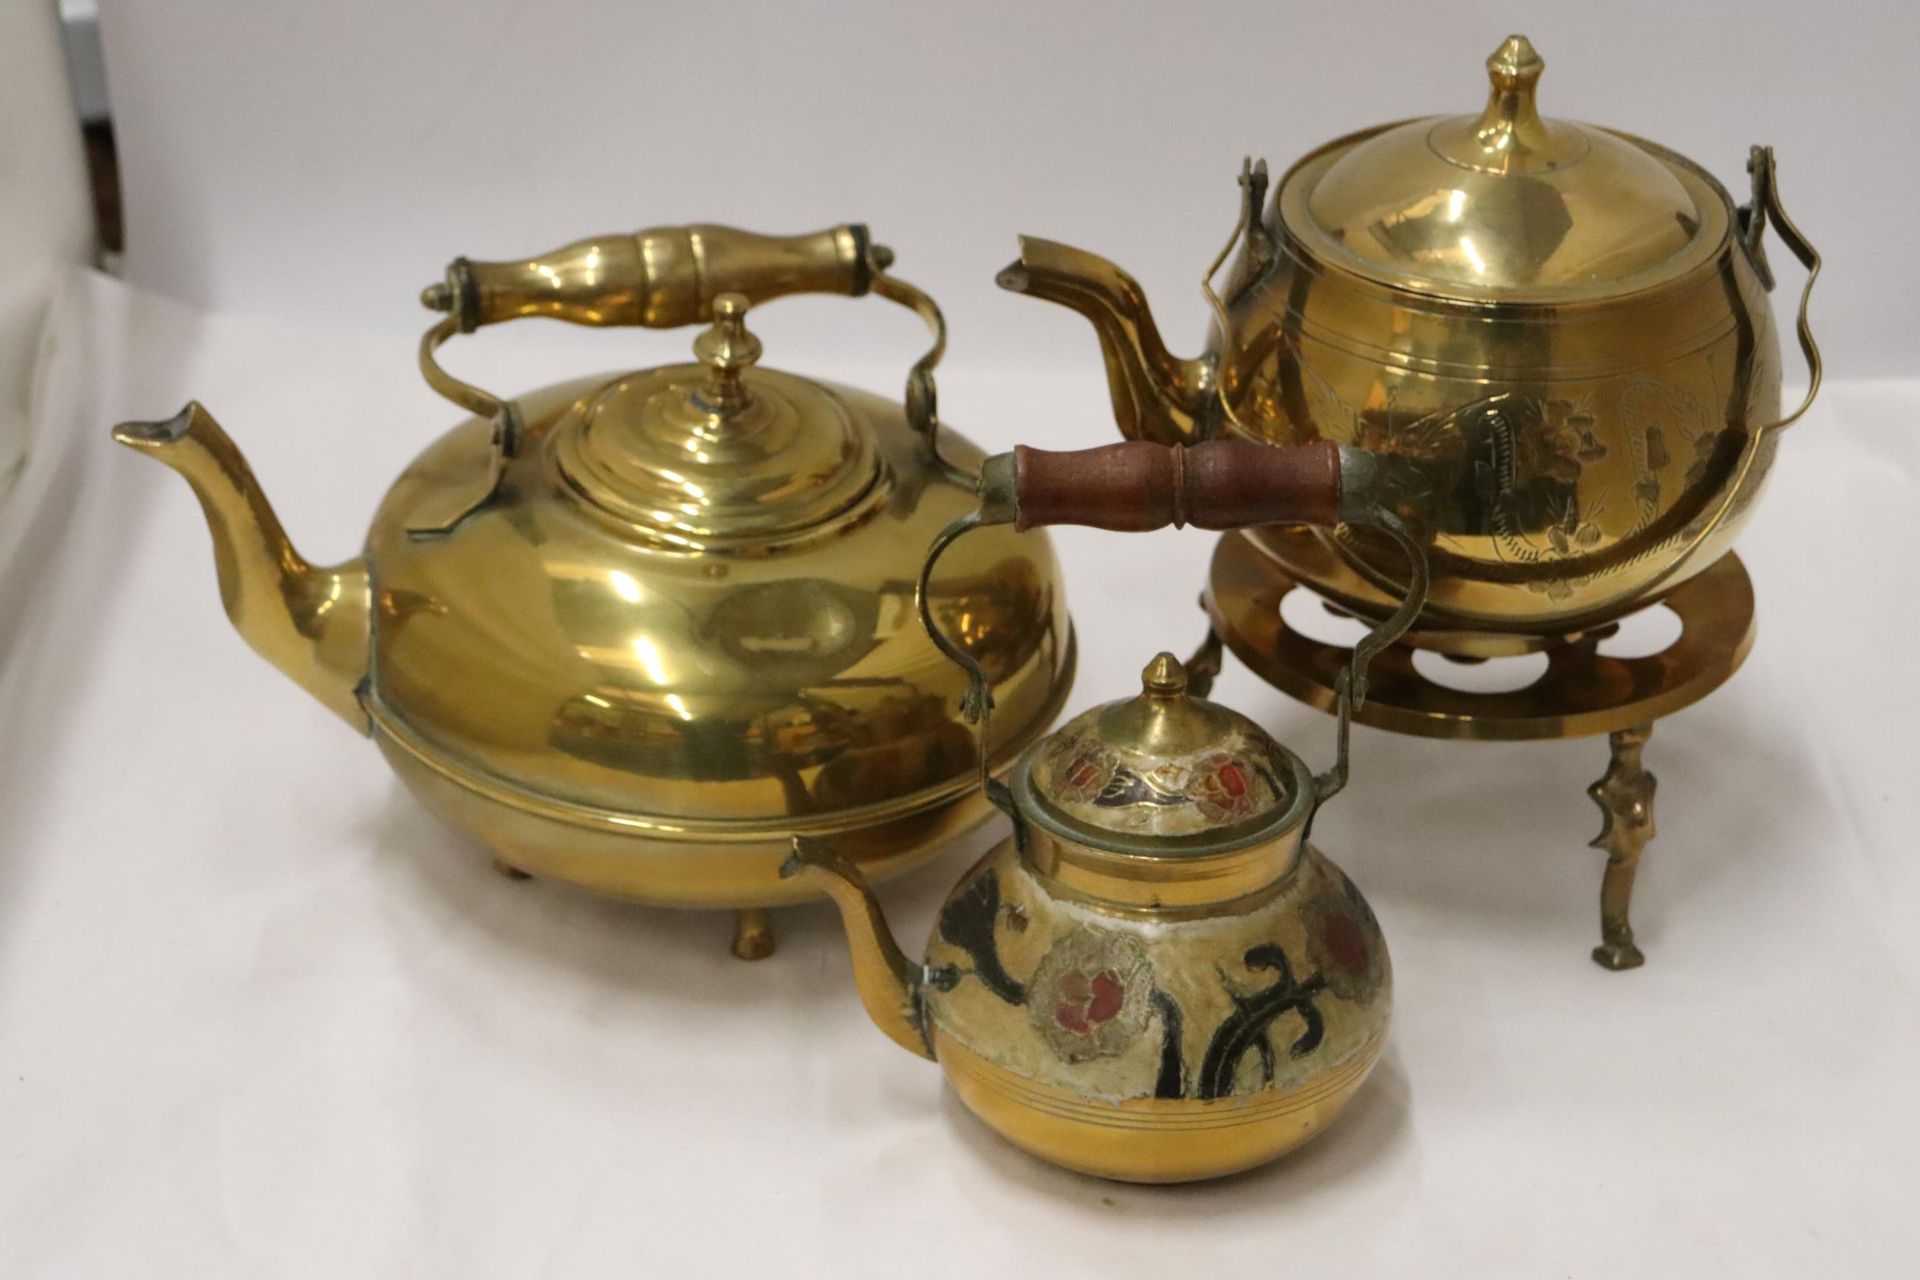 TWO BRASS KETTLES, A CLOISONNE KETTLE AND A TRIVET